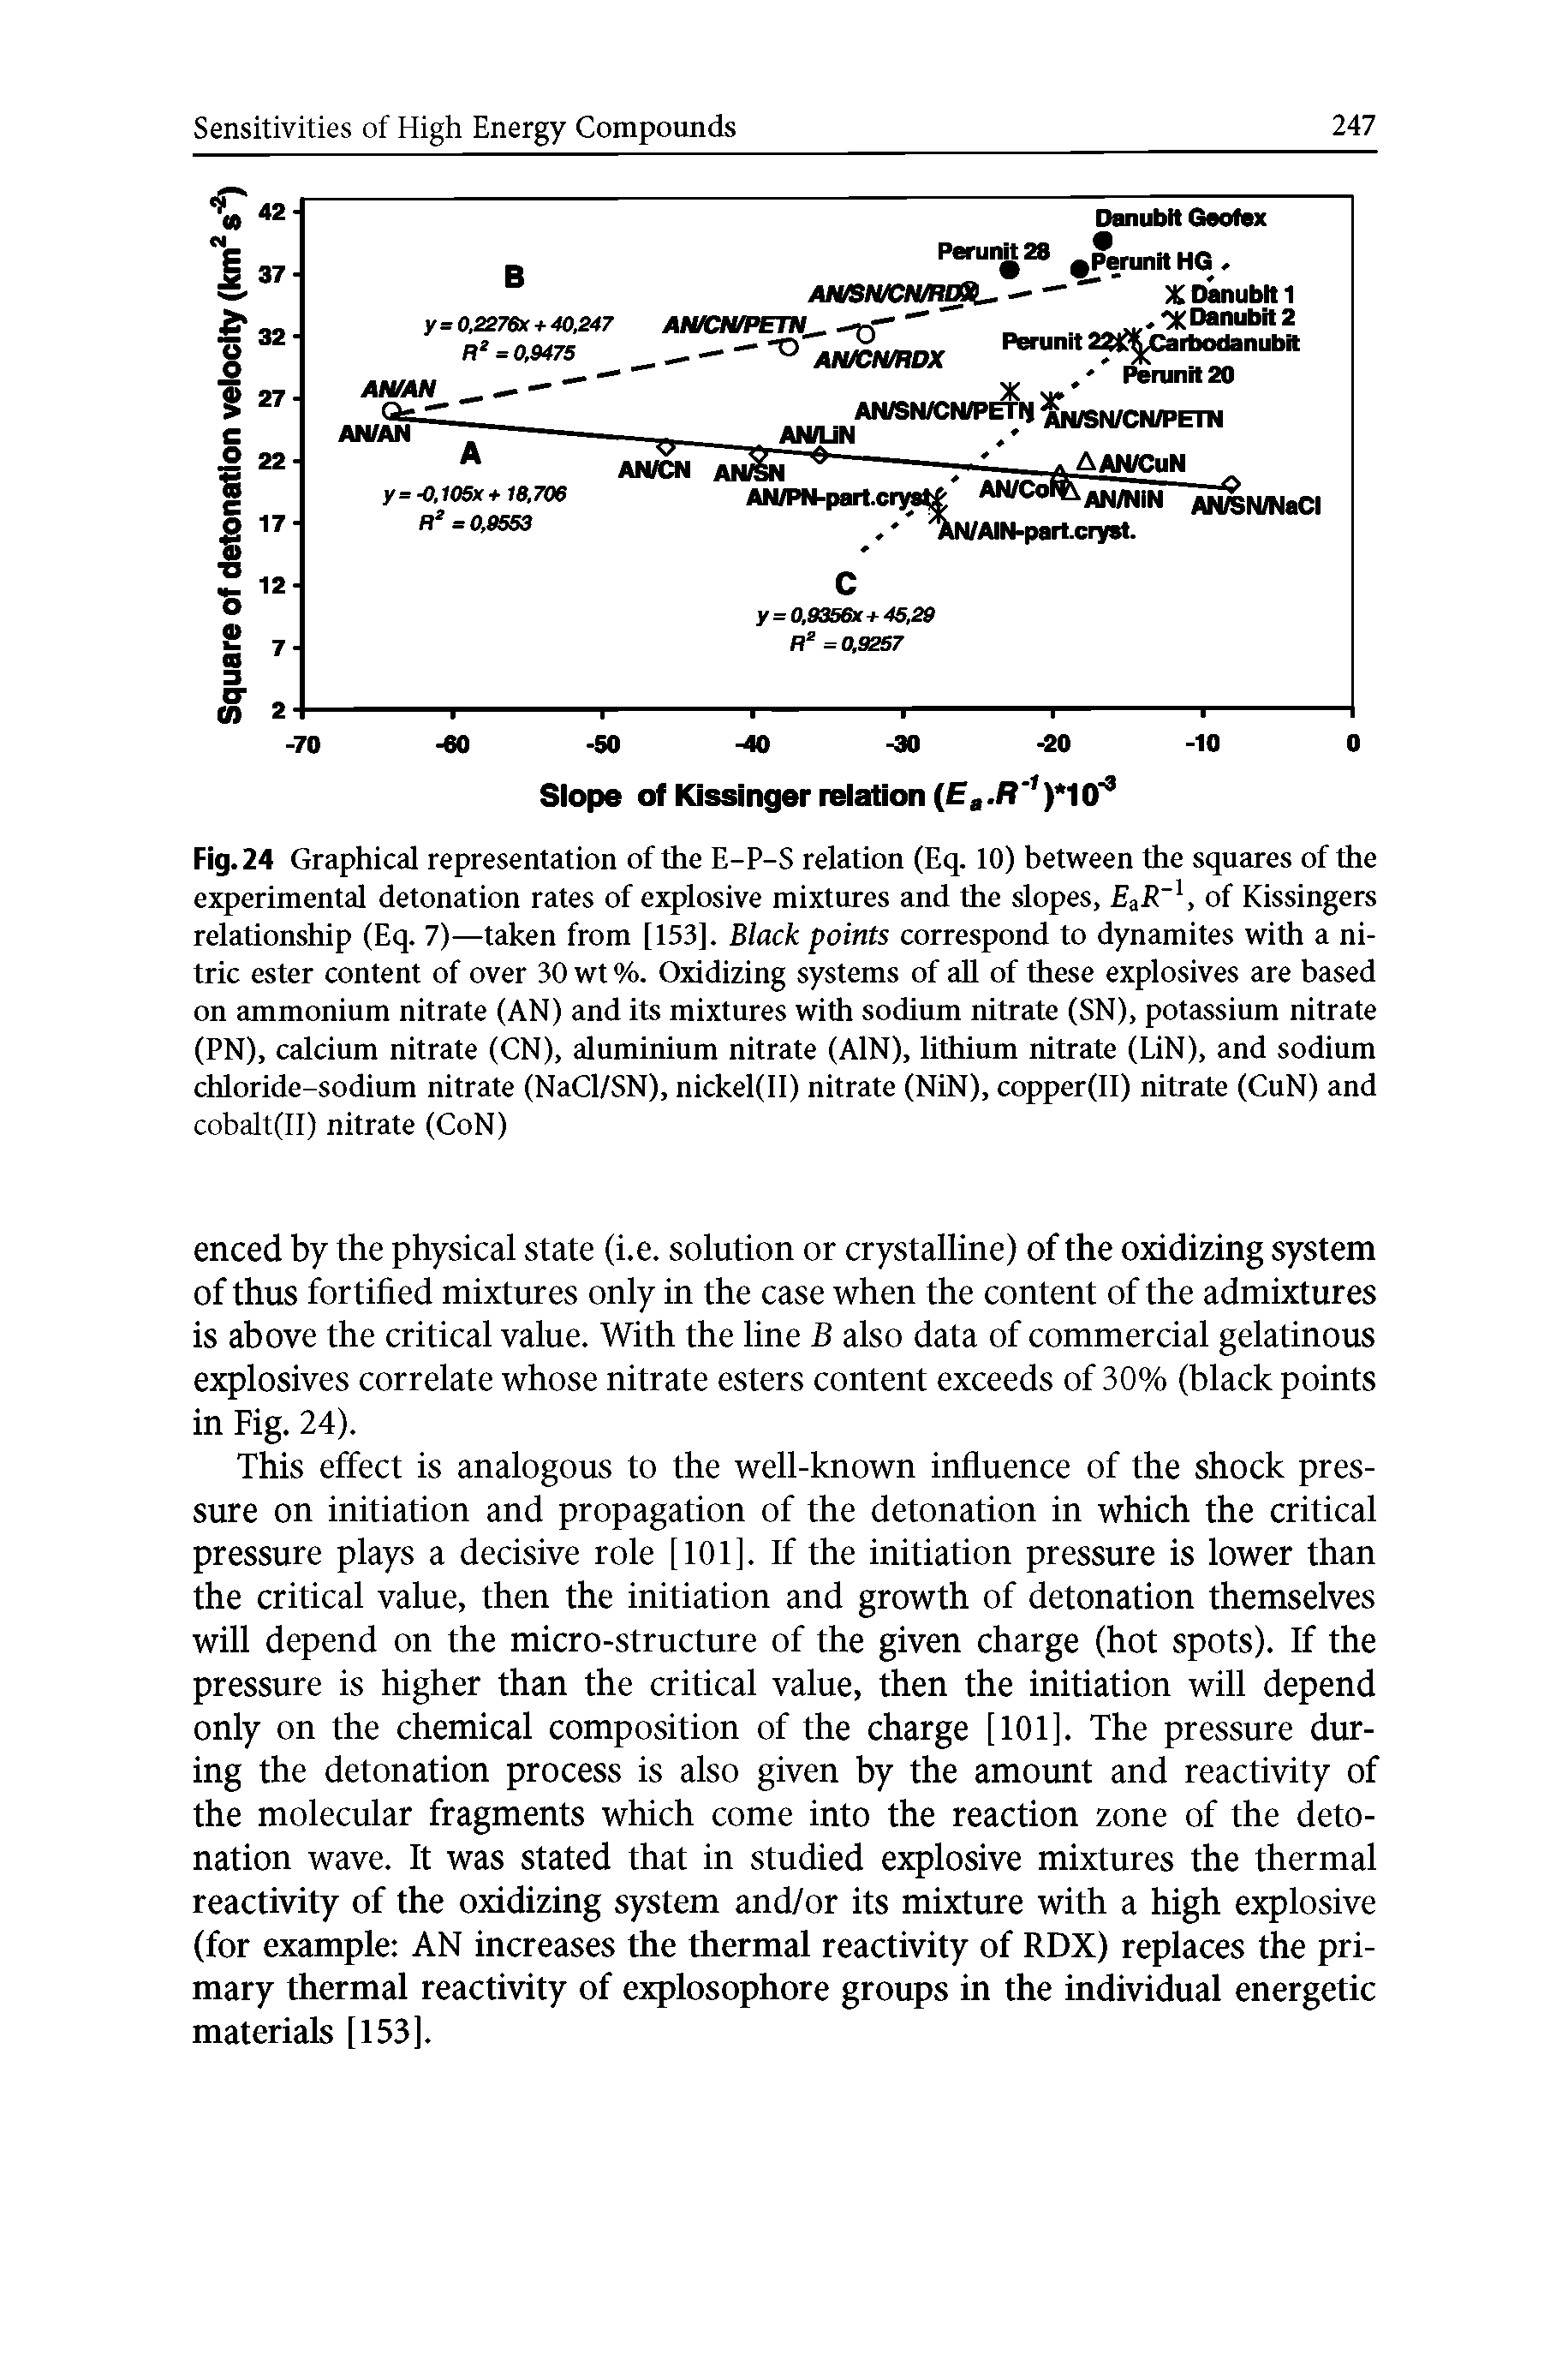 Fig. 24 Graphical representation of the E-P-S relation (Eq. 10) between the squares of the experimental detonation rates of explosive mixtures and the slopes, a-R" > of Kissingers relationship (Eq. 7)—taken from [153], Black points correspond to dynamites with a nitric ester content of over 30 wt %. Oxidizing systems of all of these explosives are based on ammonium nitrate (AN) and its mixtures with sodium nitrate (SN), potassium nitrate (PN), calcium nitrate (CN), aluminium nitrate (AlN), lithium nitrate (LiN), and sodium chloride-sodium nitrate (NaCl/SN), nickel(II) nitrate (NiN), copper(II) nitrate (CuN) and cobalt(II) nitrate (CoN)...